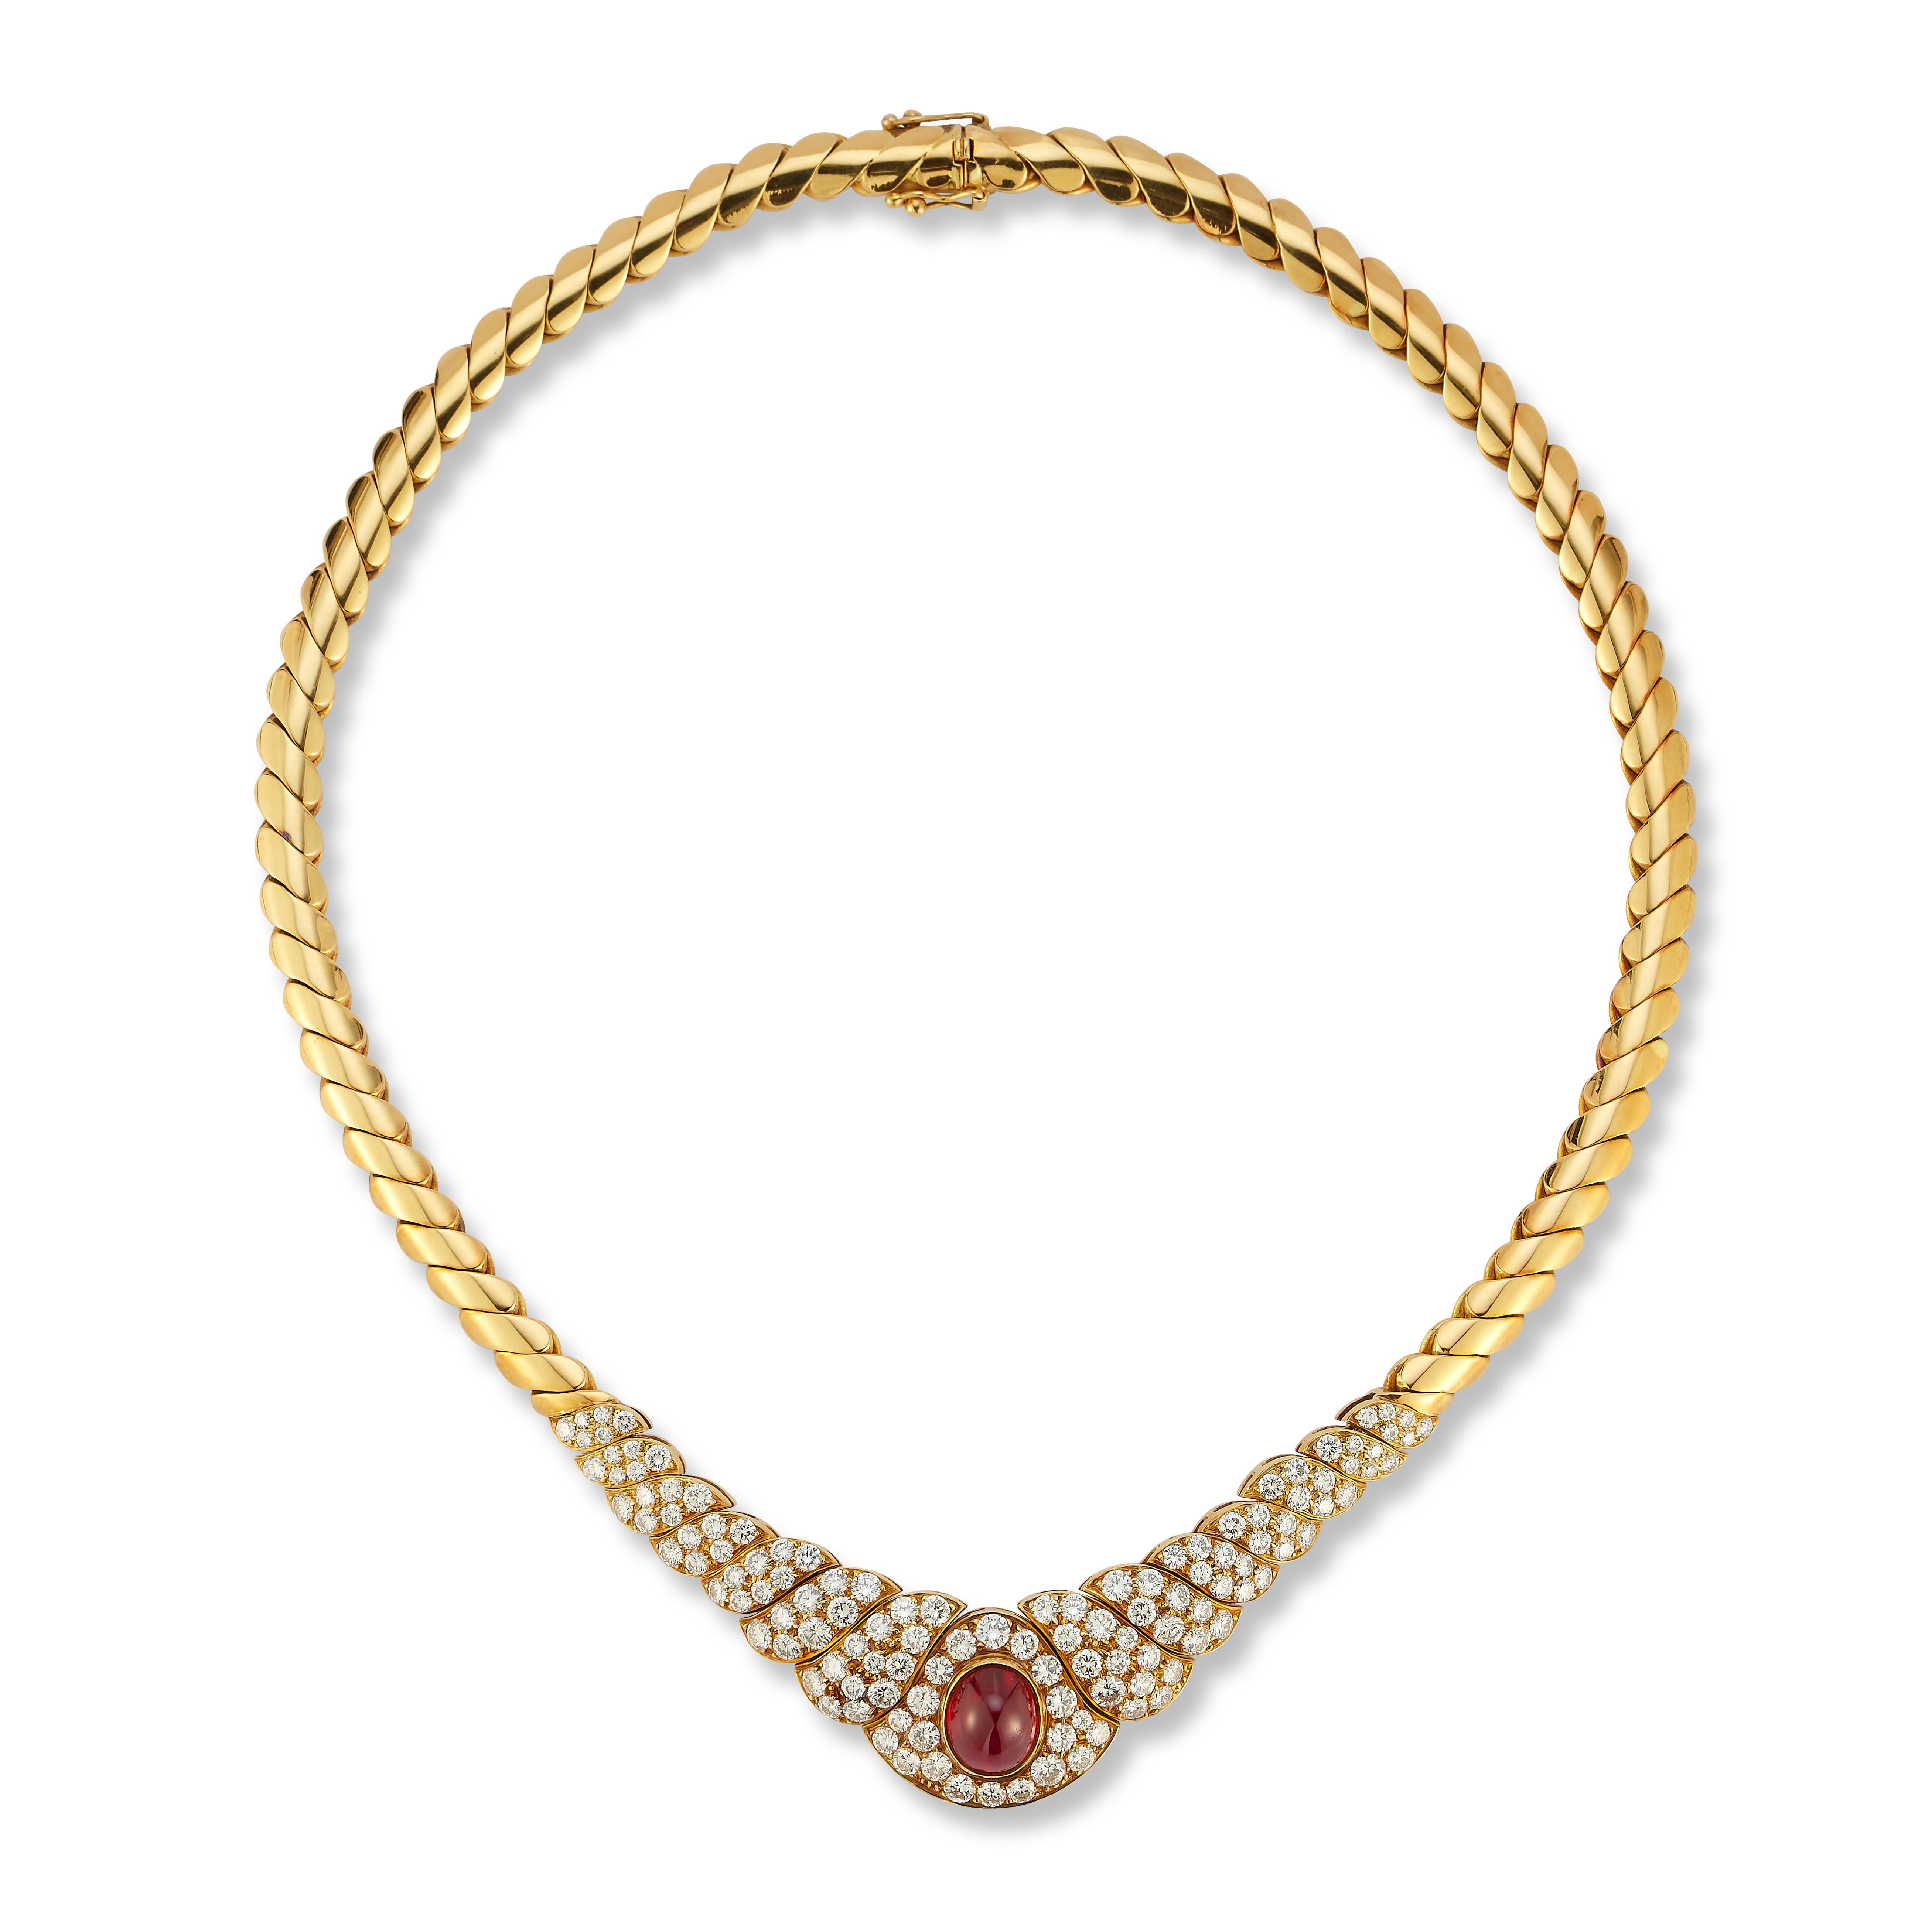 Van Cleef & Arpels Ruby & Diamond Necklace

An 18 karat yellow gold necklace set with 126 round cut diamonds and a very fine cabochon ruby

Signed VCA and numbered

Stamped 18K

Total Approximate Diamond Weight: 6.93 carats

Length: 16